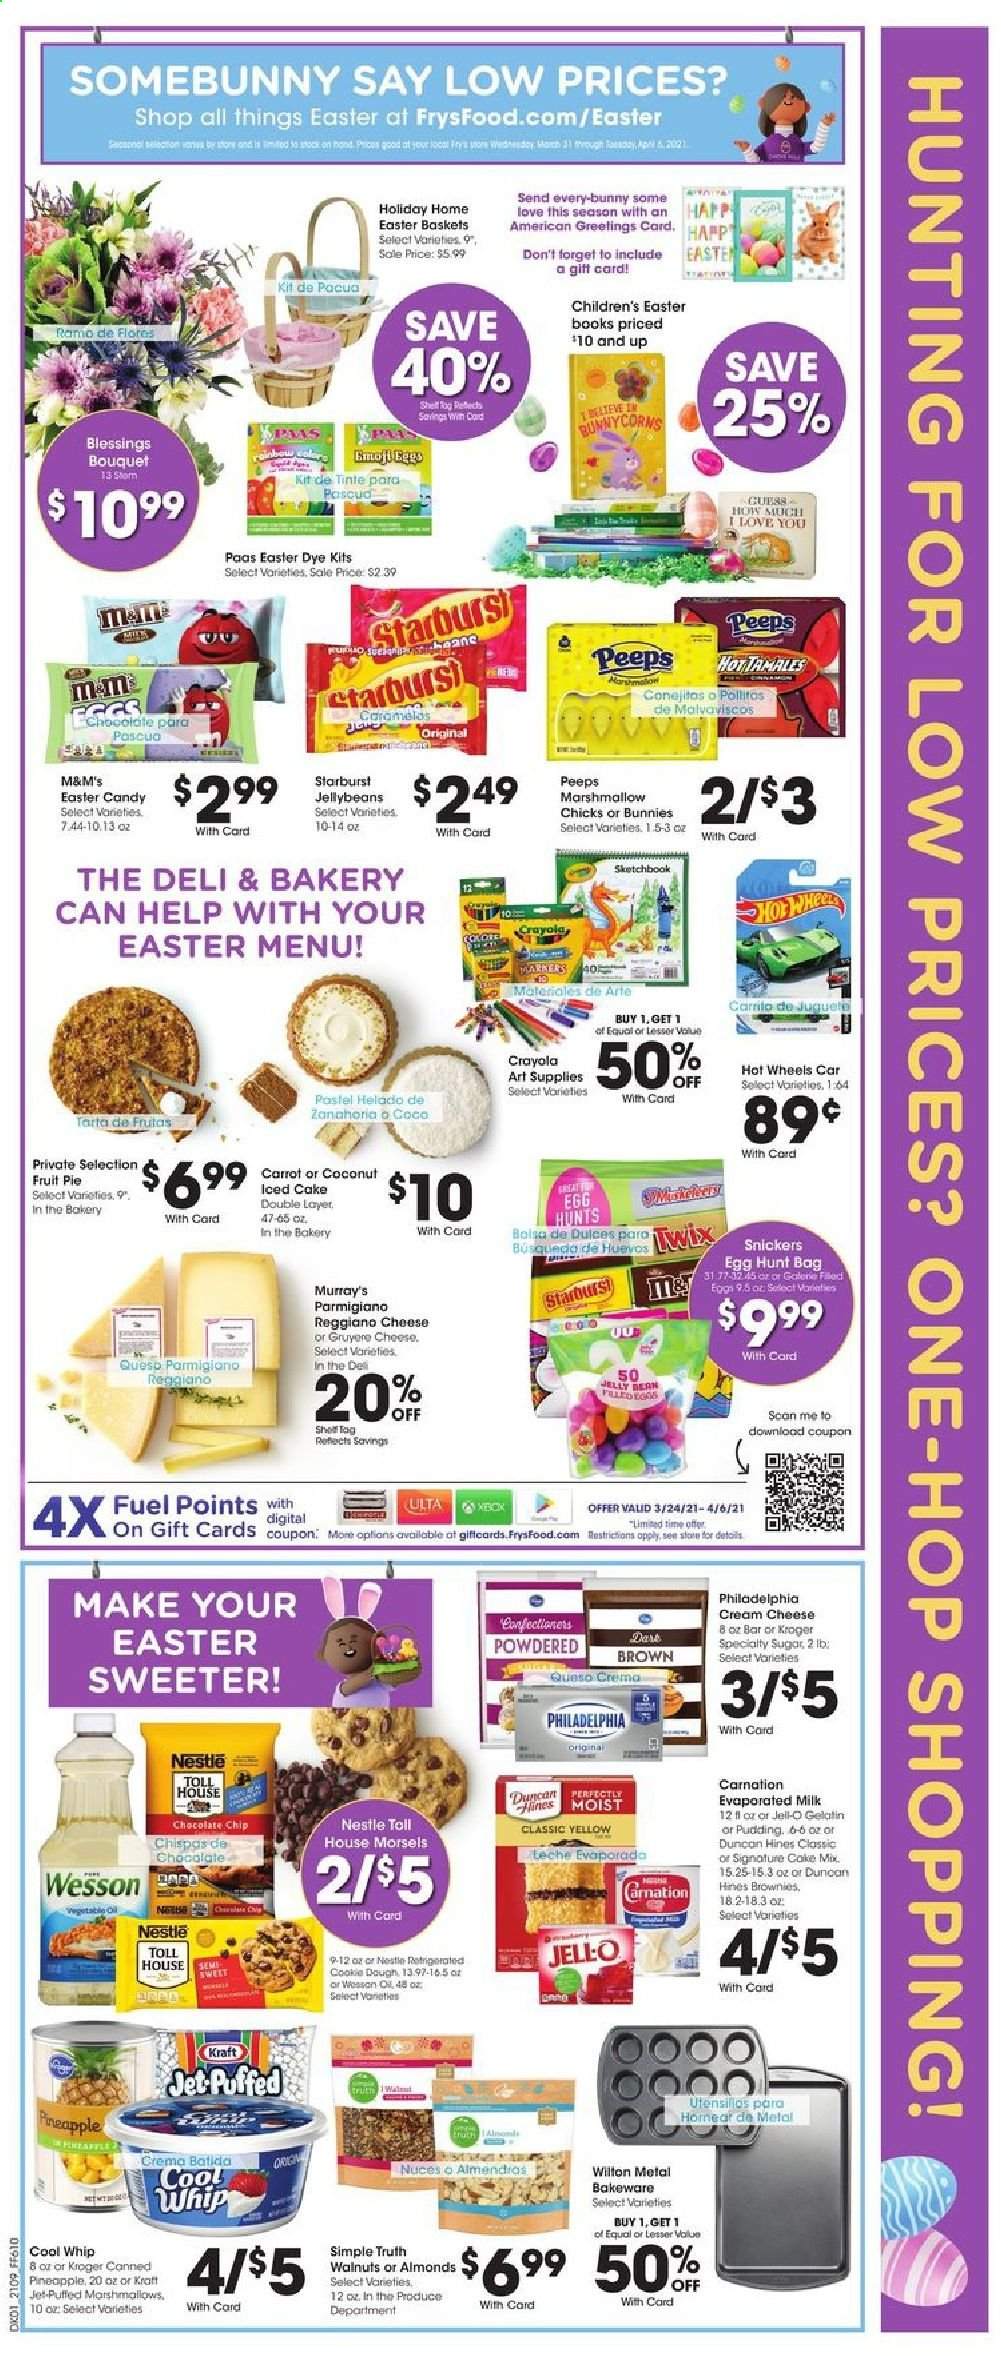 thumbnail - Fry’s Flyer - 03/31/2021 - 04/06/2021 - Sales products - cake, pie, brownies, coconut, Kraft®, Gruyere, Philadelphia, Parmigiano Reggiano, pudding, jelly, eggs, Cool Whip, cookie dough, marshmallows, Nestlé, Snickers, M&M's, Starburst, Peeps, sugar, Jell-O, almonds, walnuts, Coca-Cola, Jet, Guess, basket, bakeware, crayons, sketch pad, book, gelatin. Page 2.